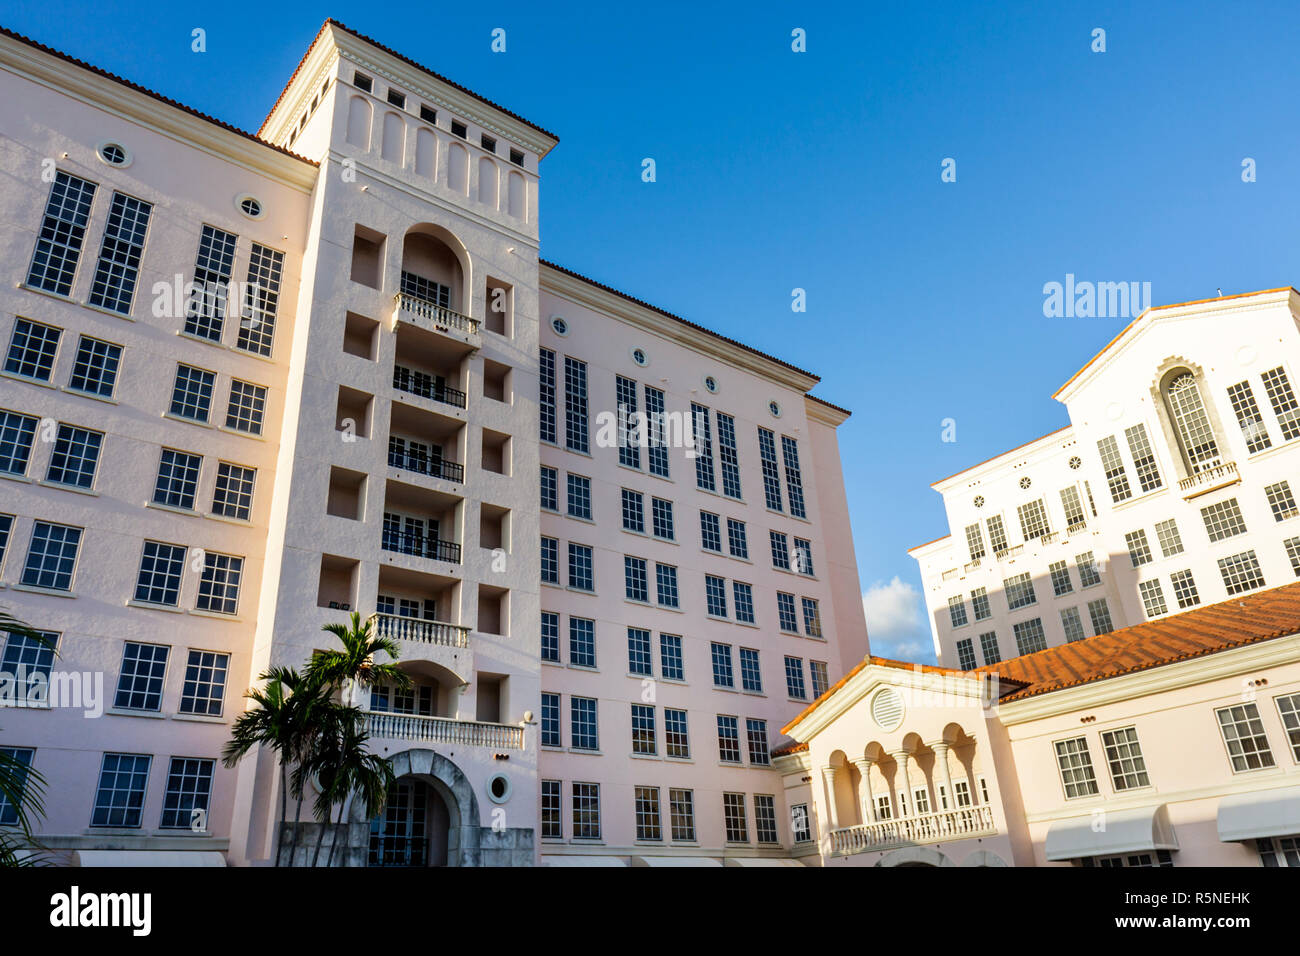 Miami Florida,Coral Gables,Hyatt Regency,chain,lodging,hotel,building,outside exterior,front,entrance,Mediterranean style architecture,barrel tile roo Stock Photo